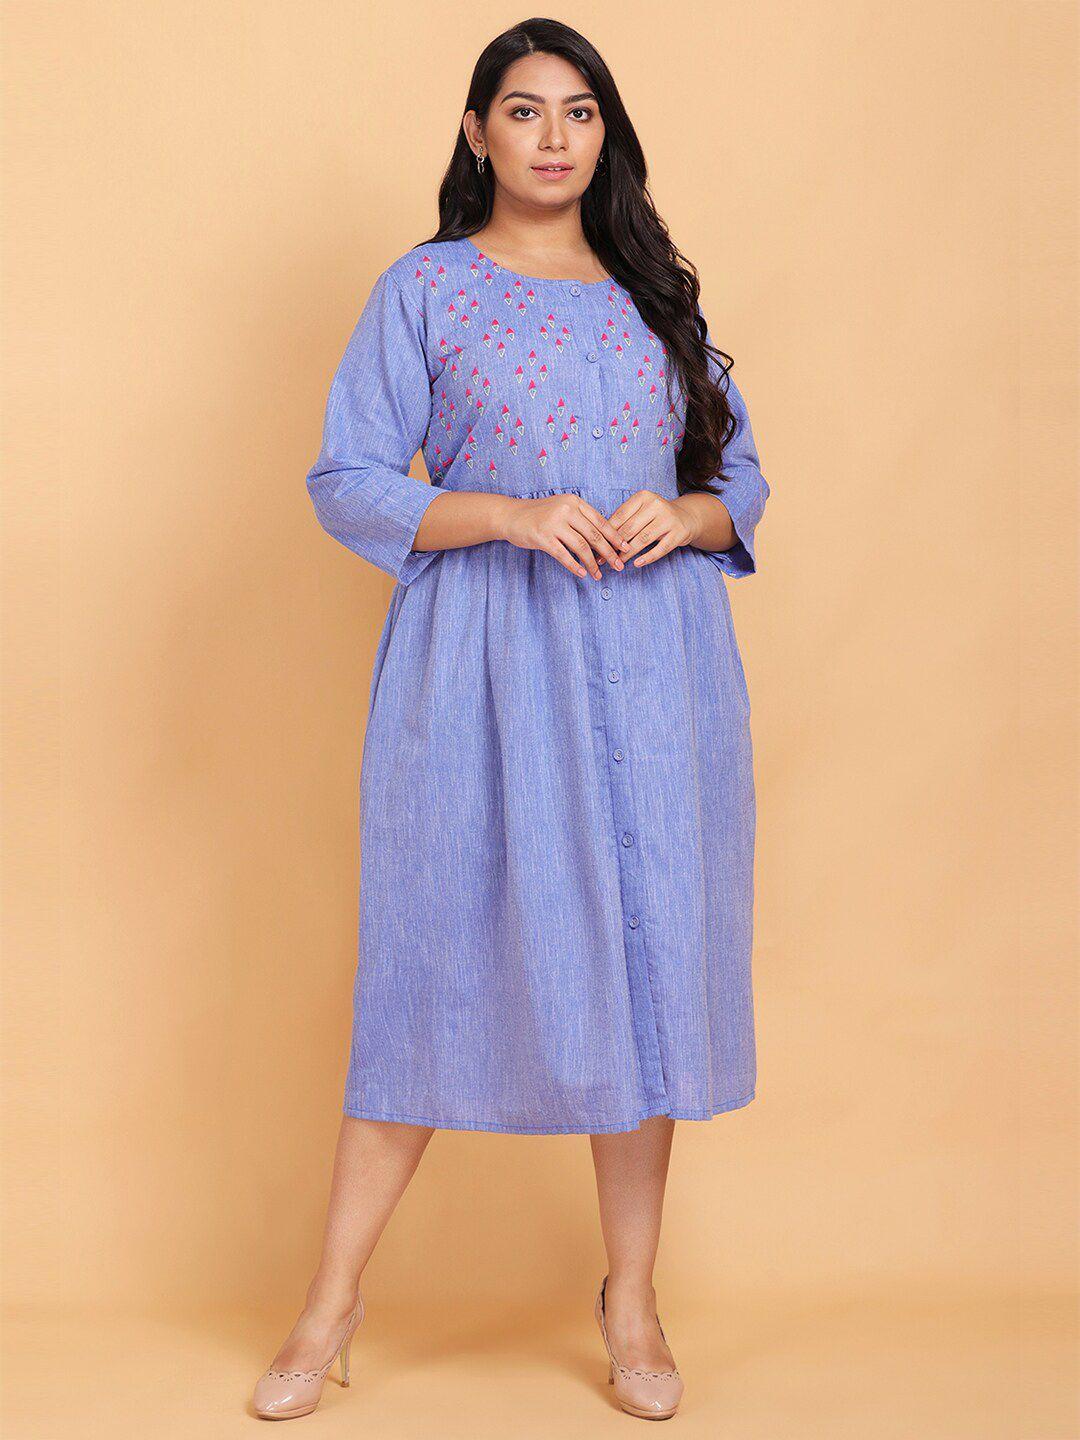 lastinch blue  chambray embroidered dress